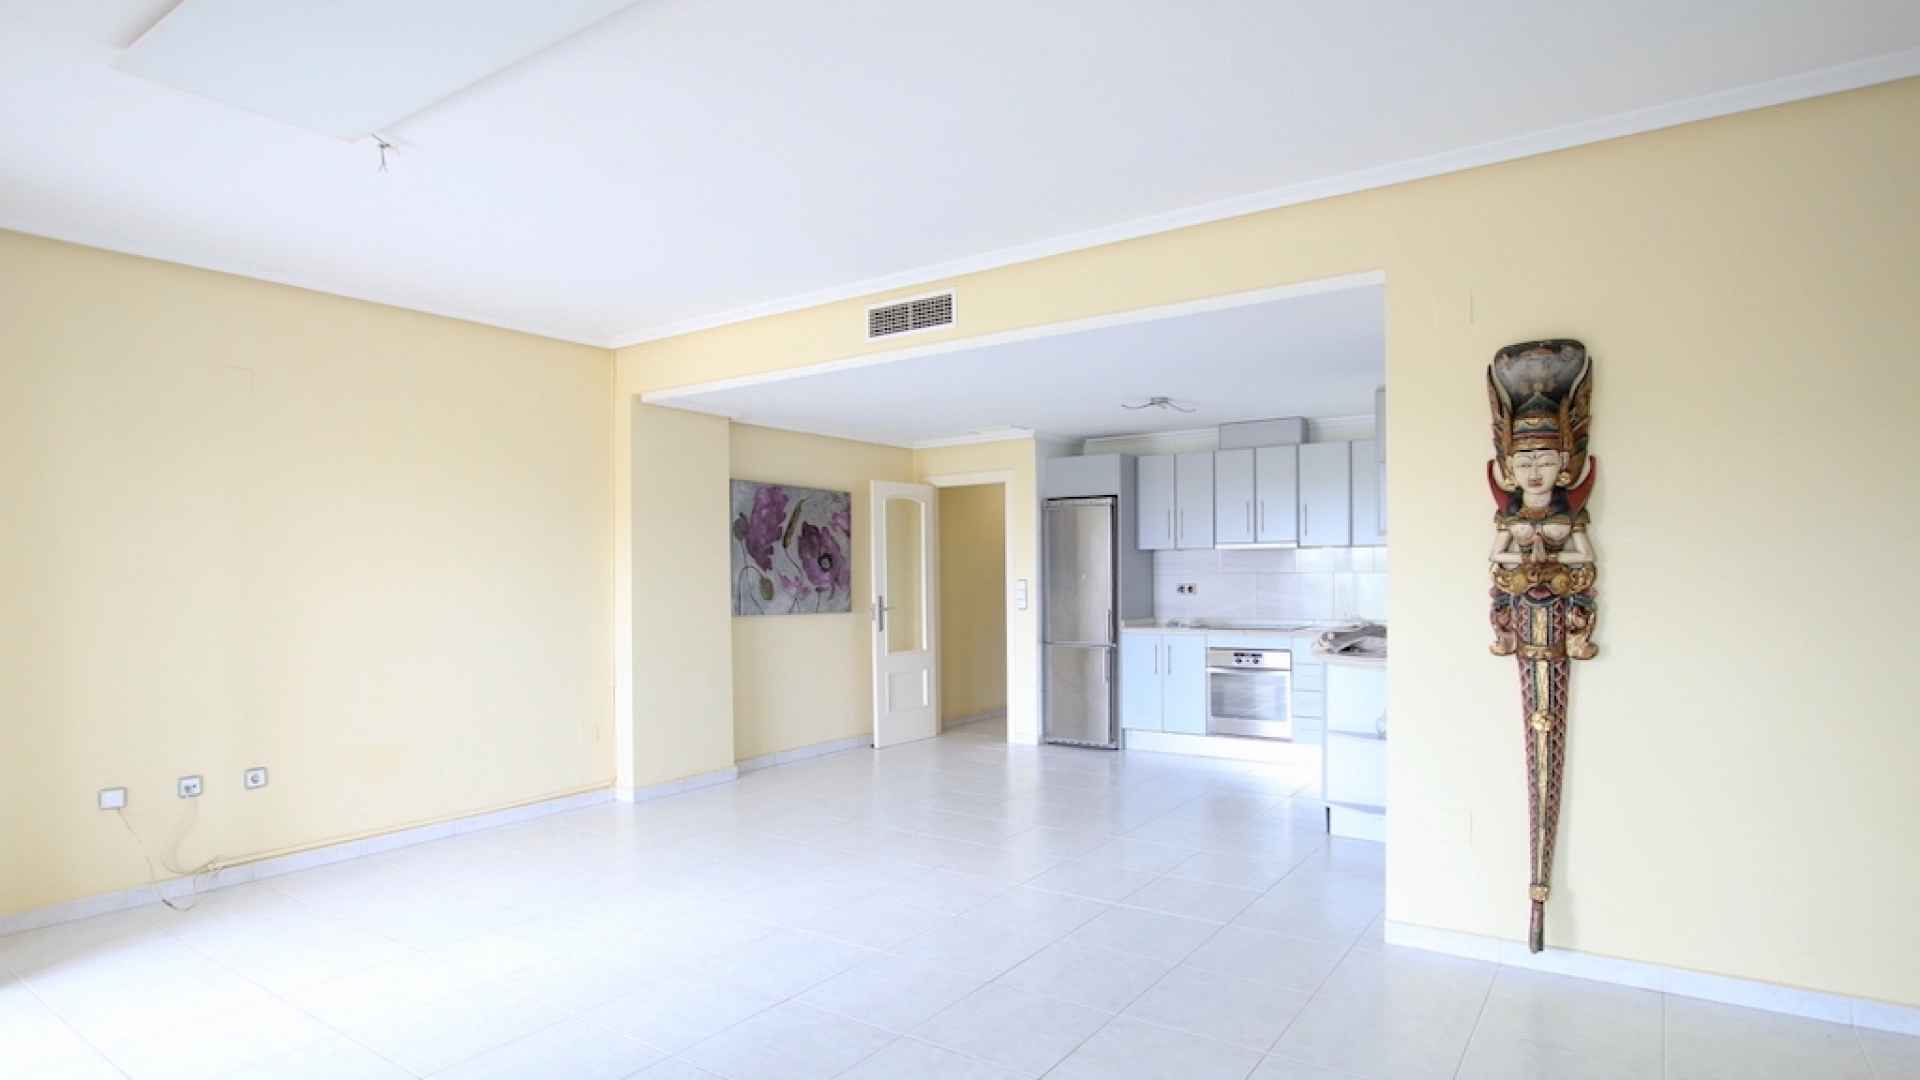 48172_exceptionally_spacious_3_bed_apartment_with_stunning_views_070823130833_img_7783